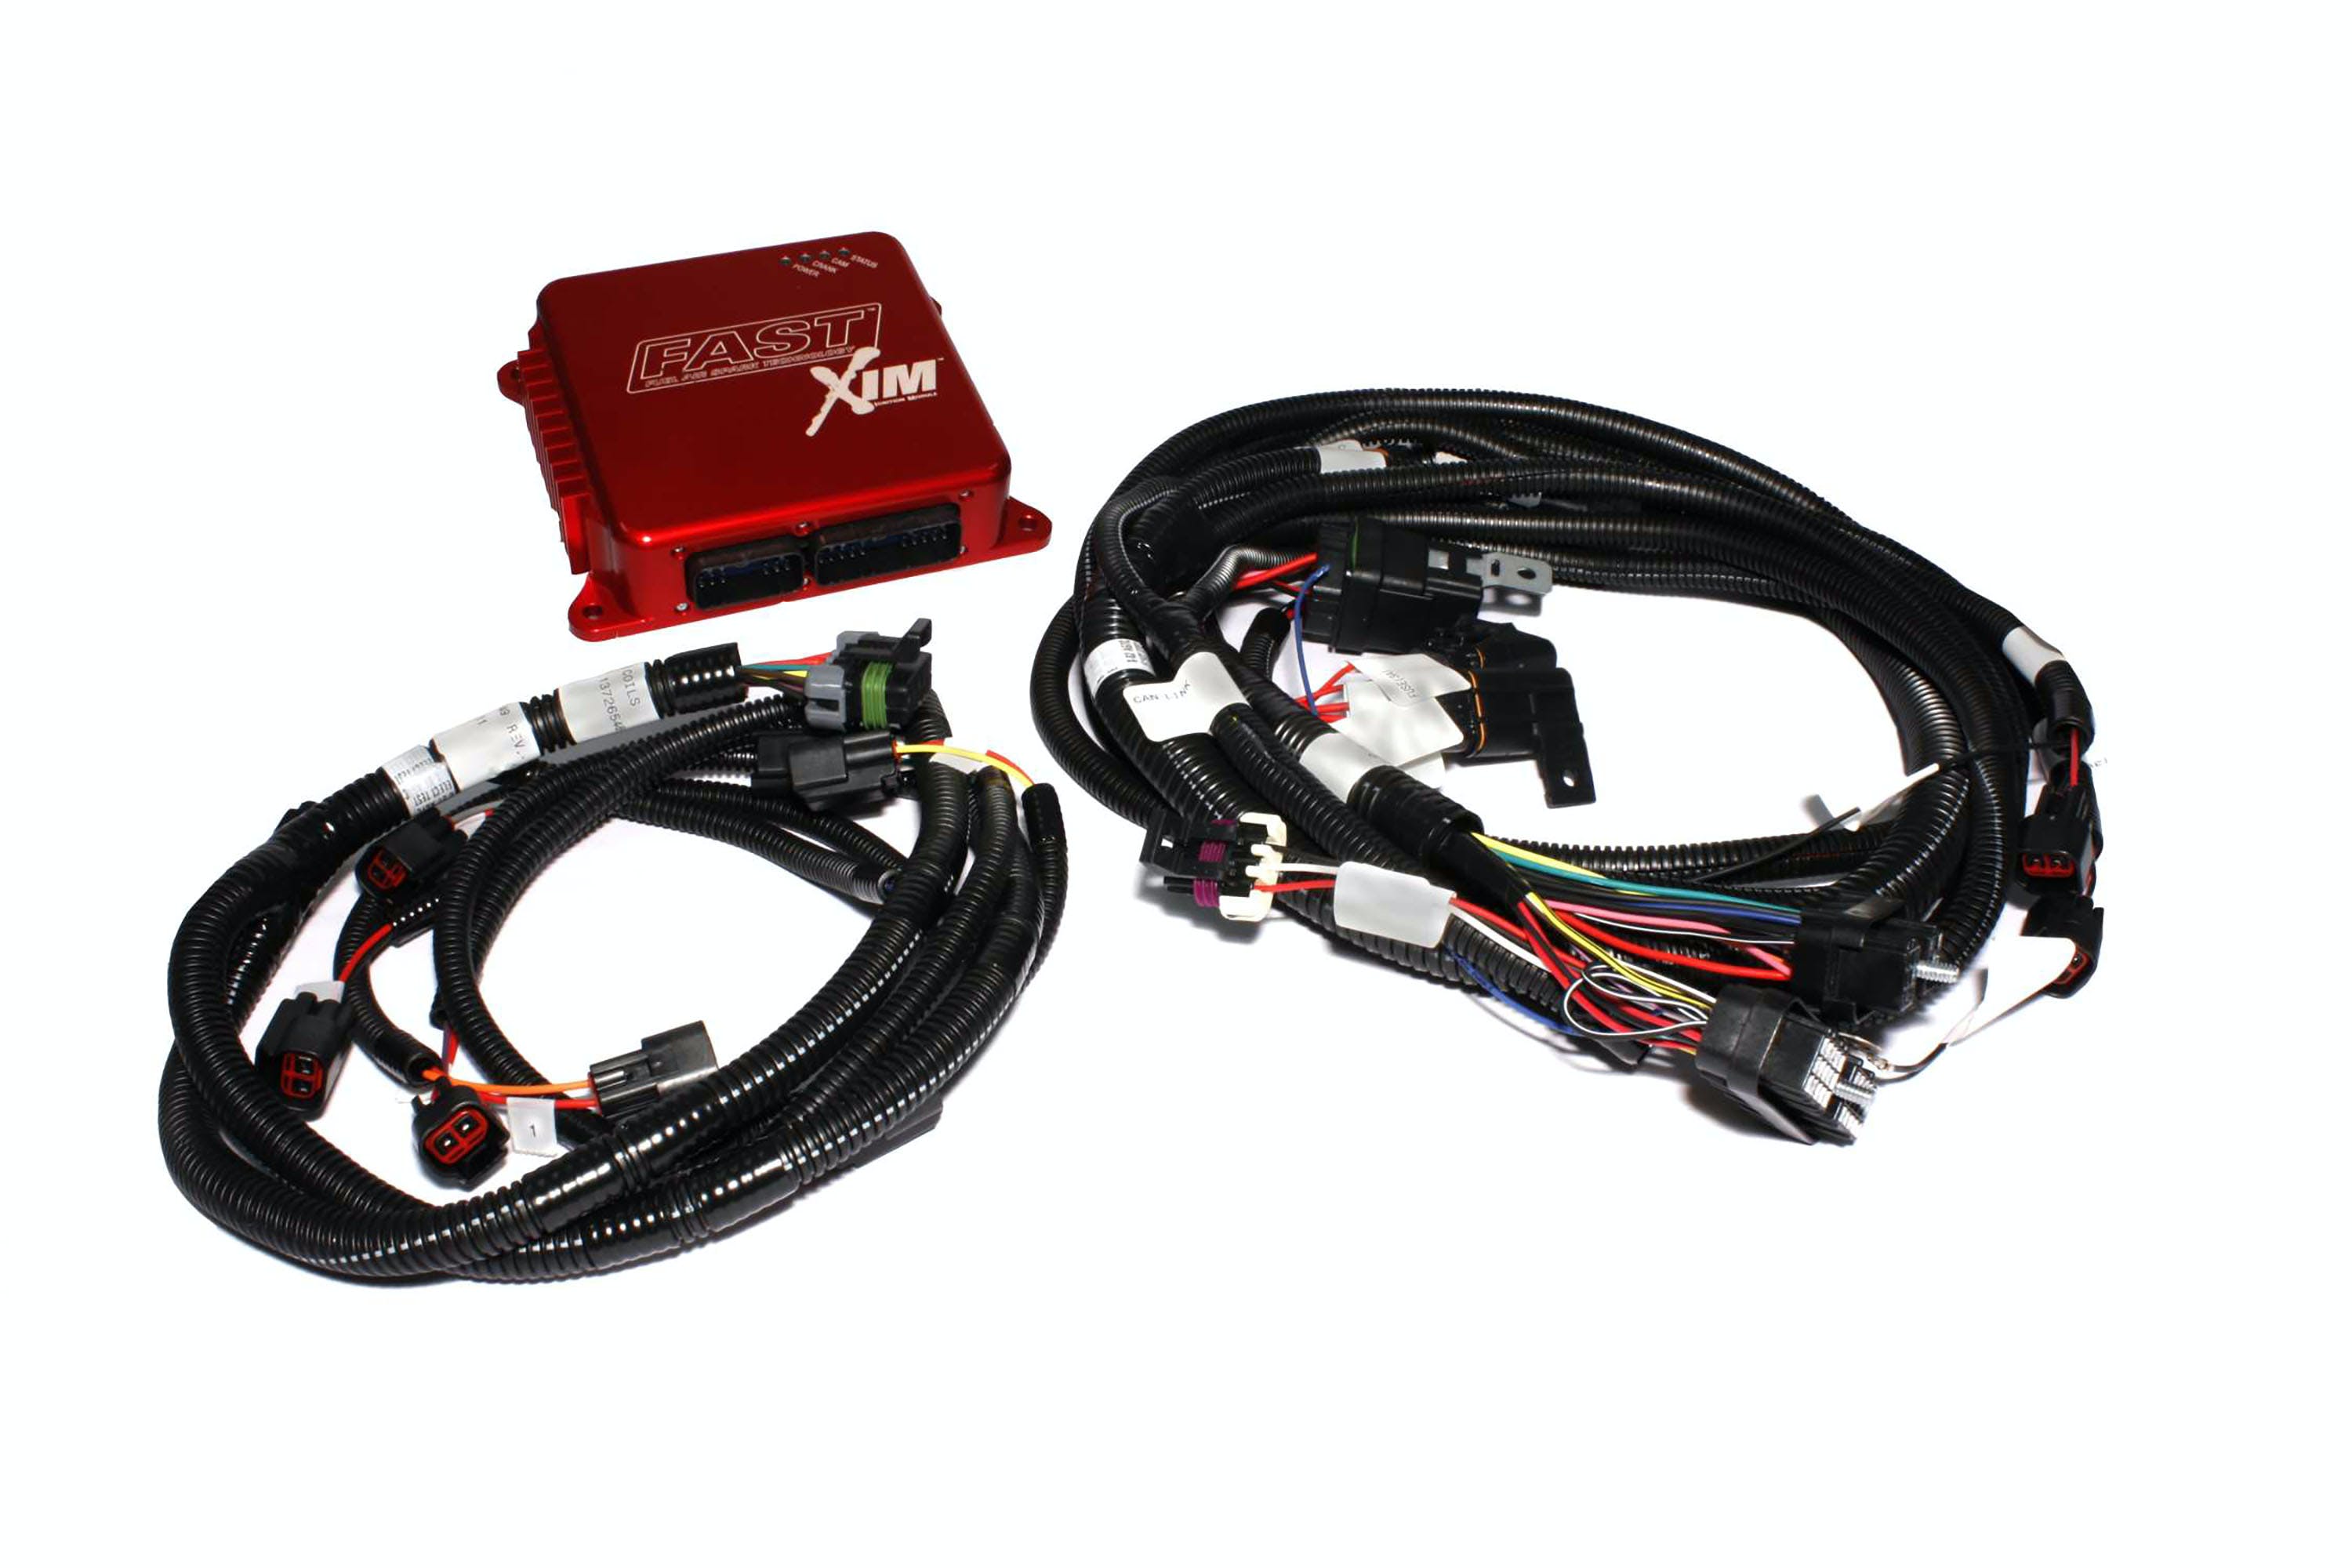 FAST - Fuel Air Spark Technology 301313 XIM Kit for Ford Modular Coil-On-Plug